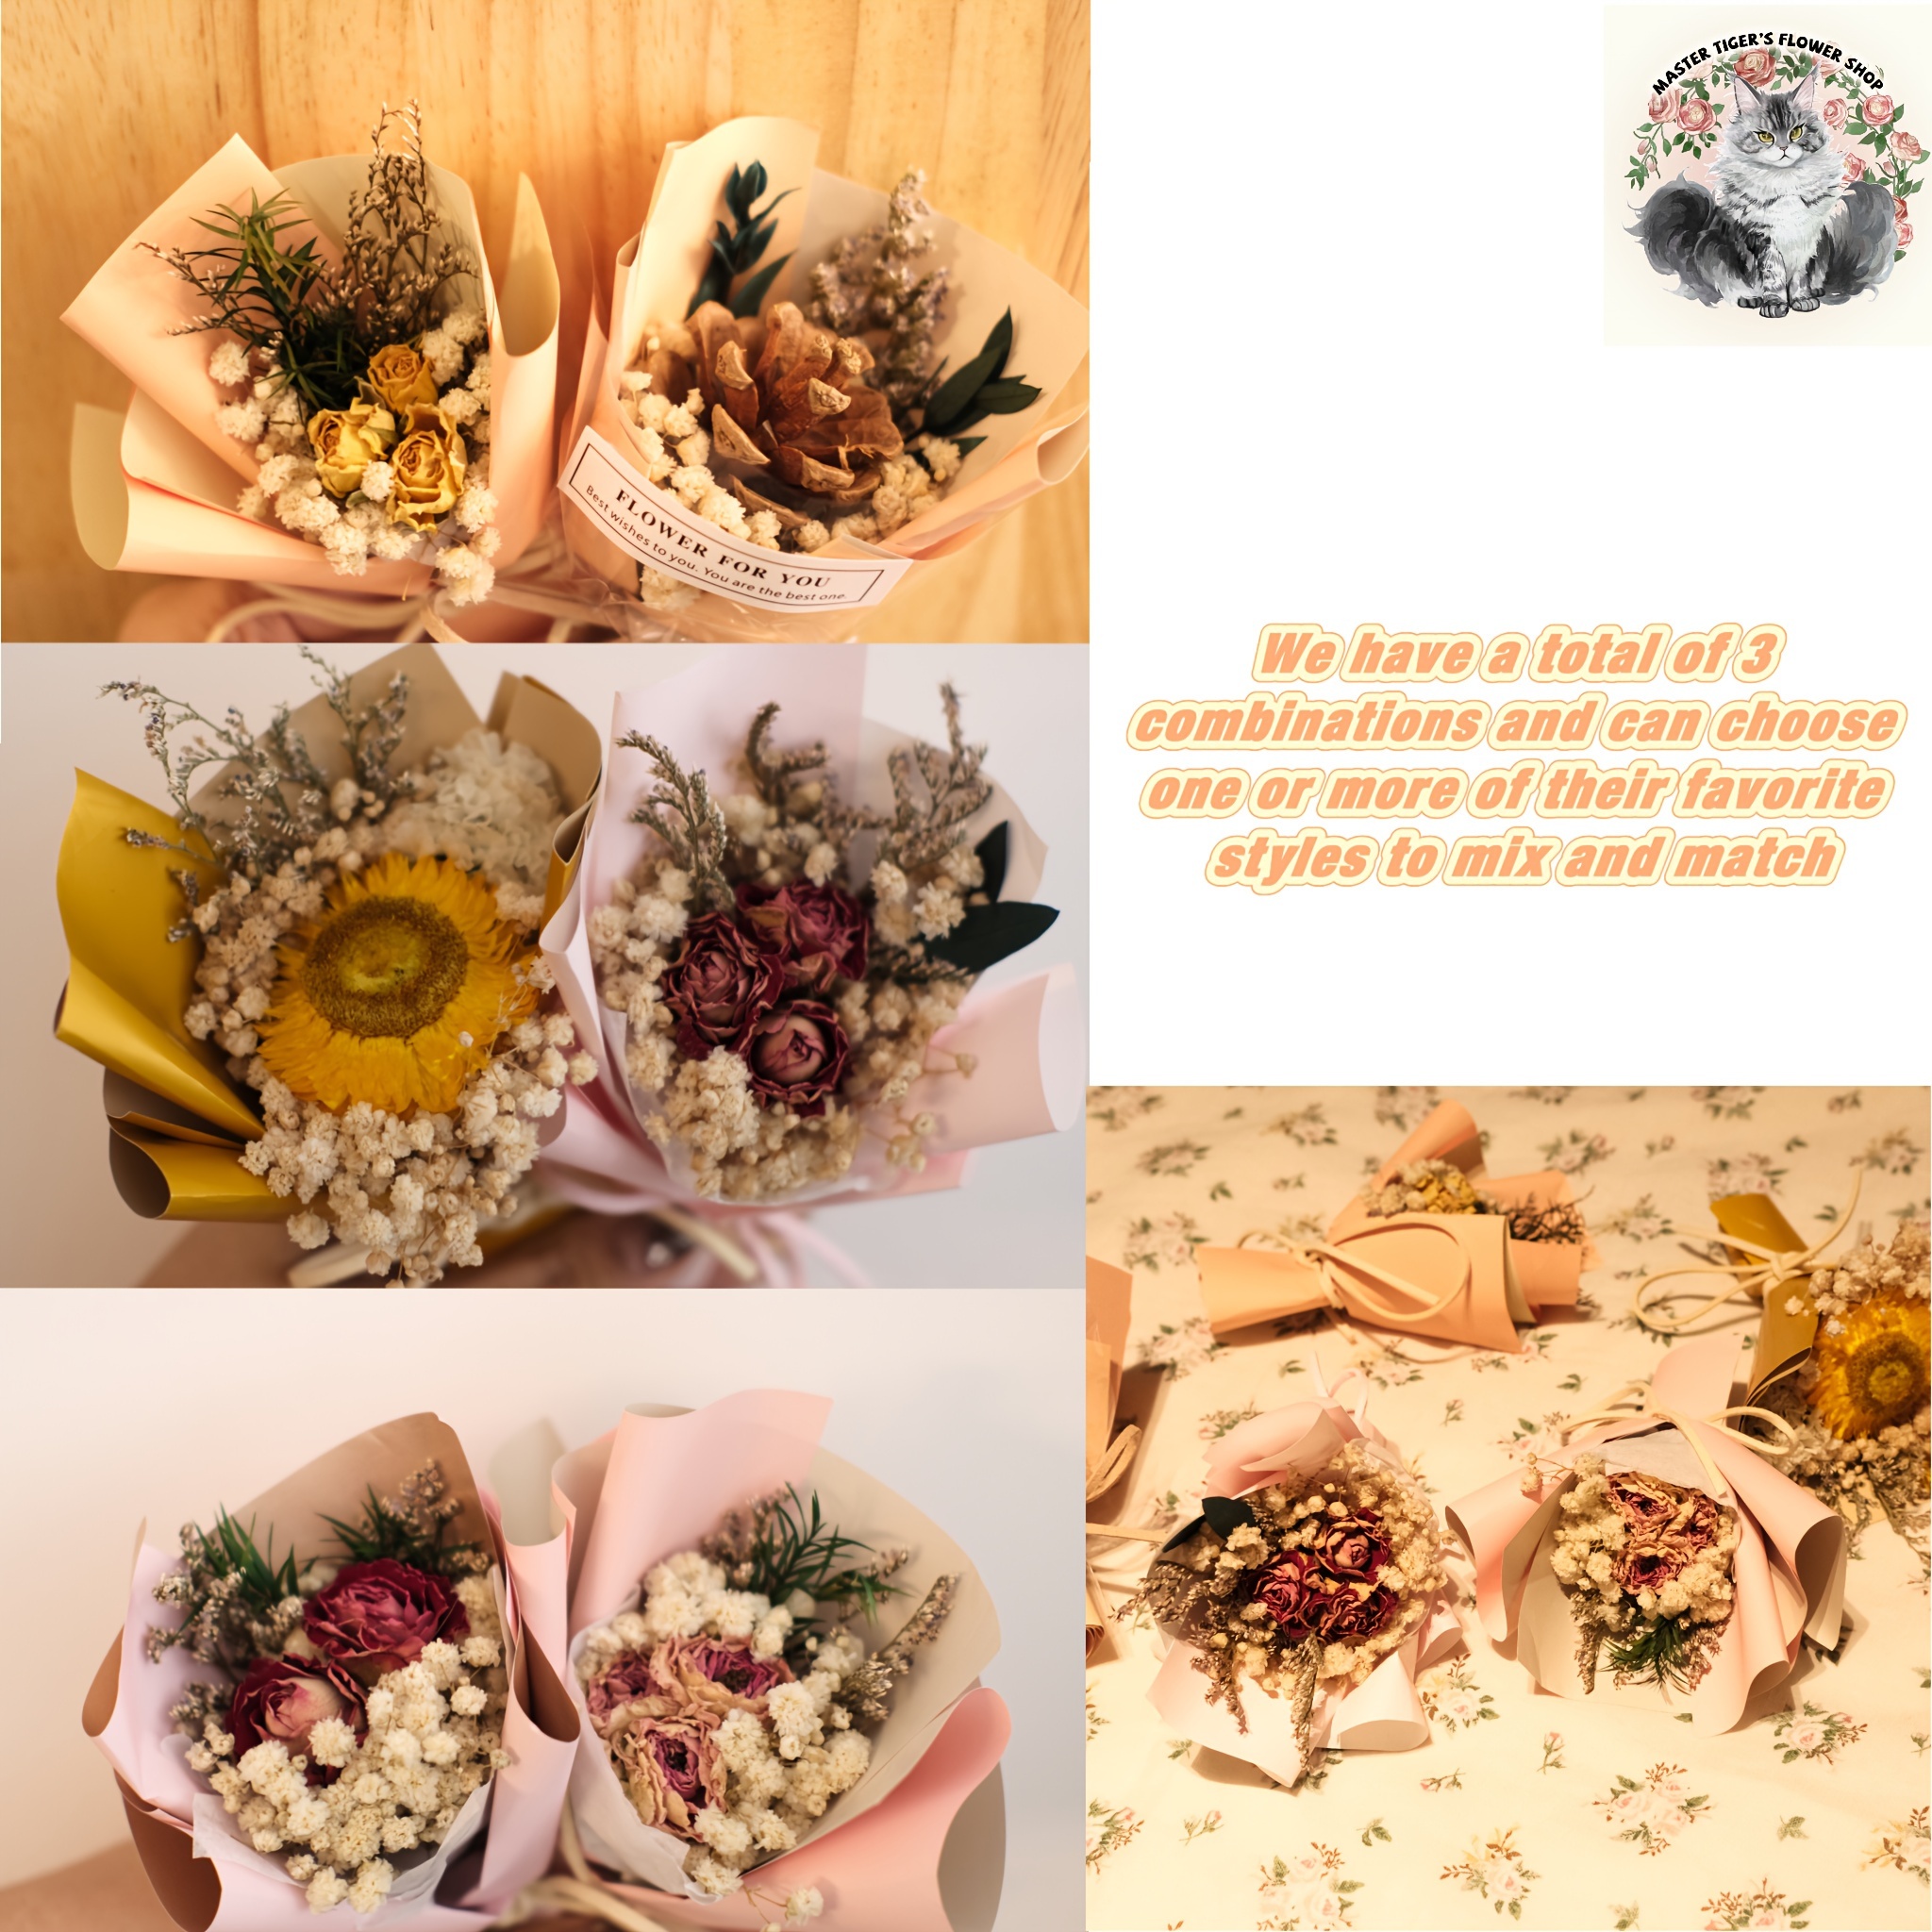 Rose Mini Delicate Bouquet of Dried Flowers Car Aromatherapy Air Outlet Car  Interior Decoration Ornaments